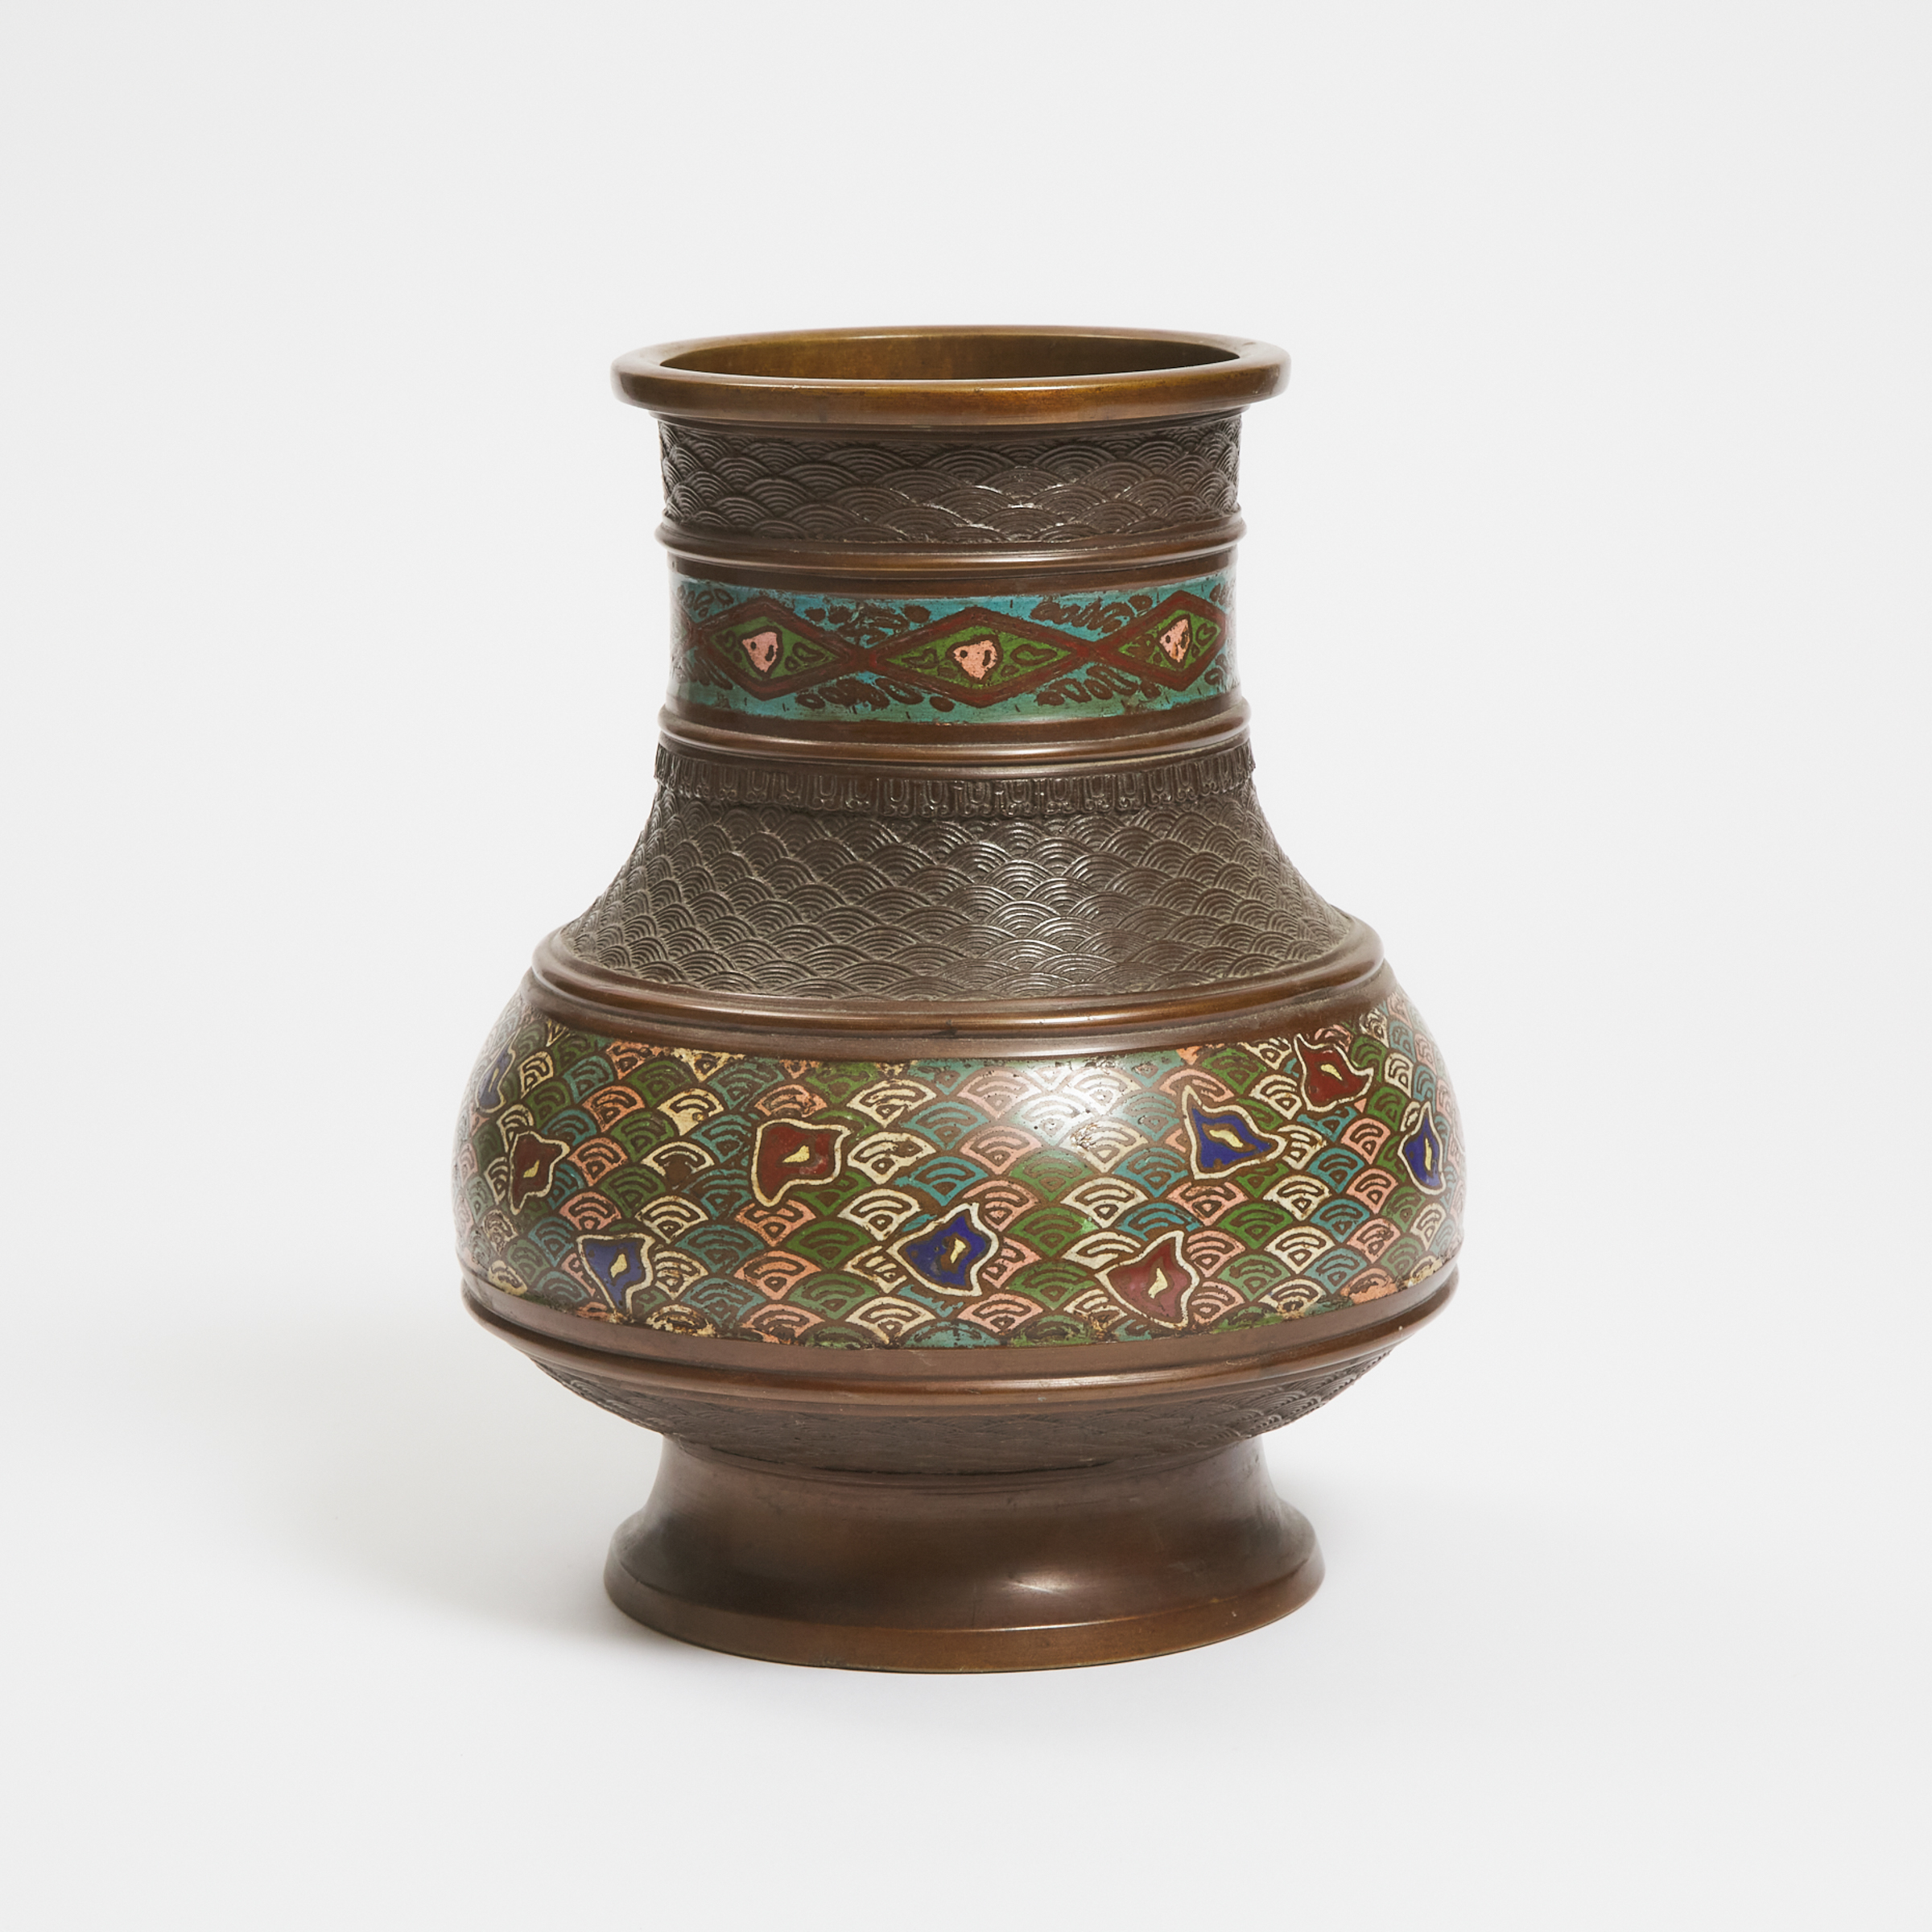 A Japanese Bronze Champlevé Enamel Vase, Late 19th/Early 20th Century